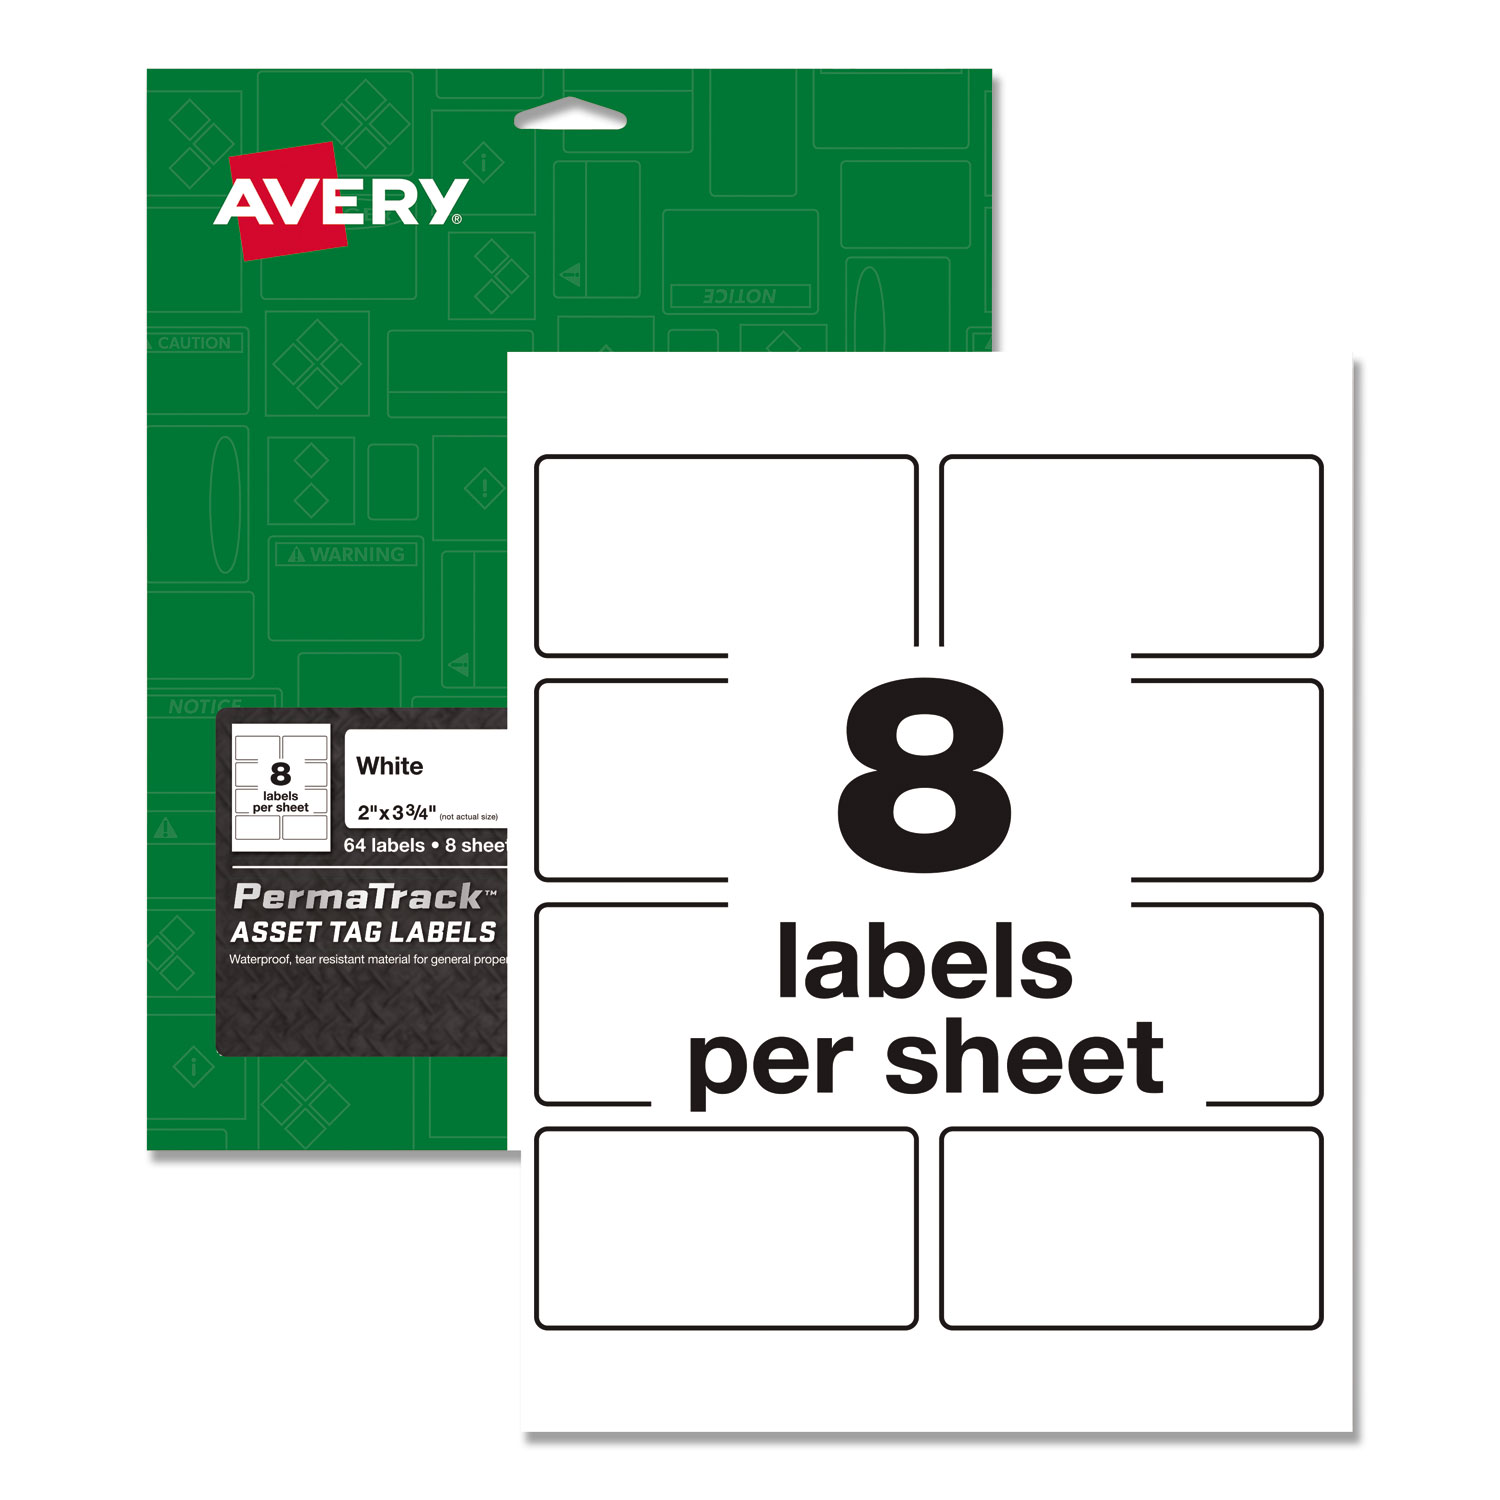  Avery 61530 PermaTrack Durable White Asset Tag Labels, Laser Printers, 2 x 3.75, White, 8/Sheet, 8 Sheets/Pack (AVE61530) 